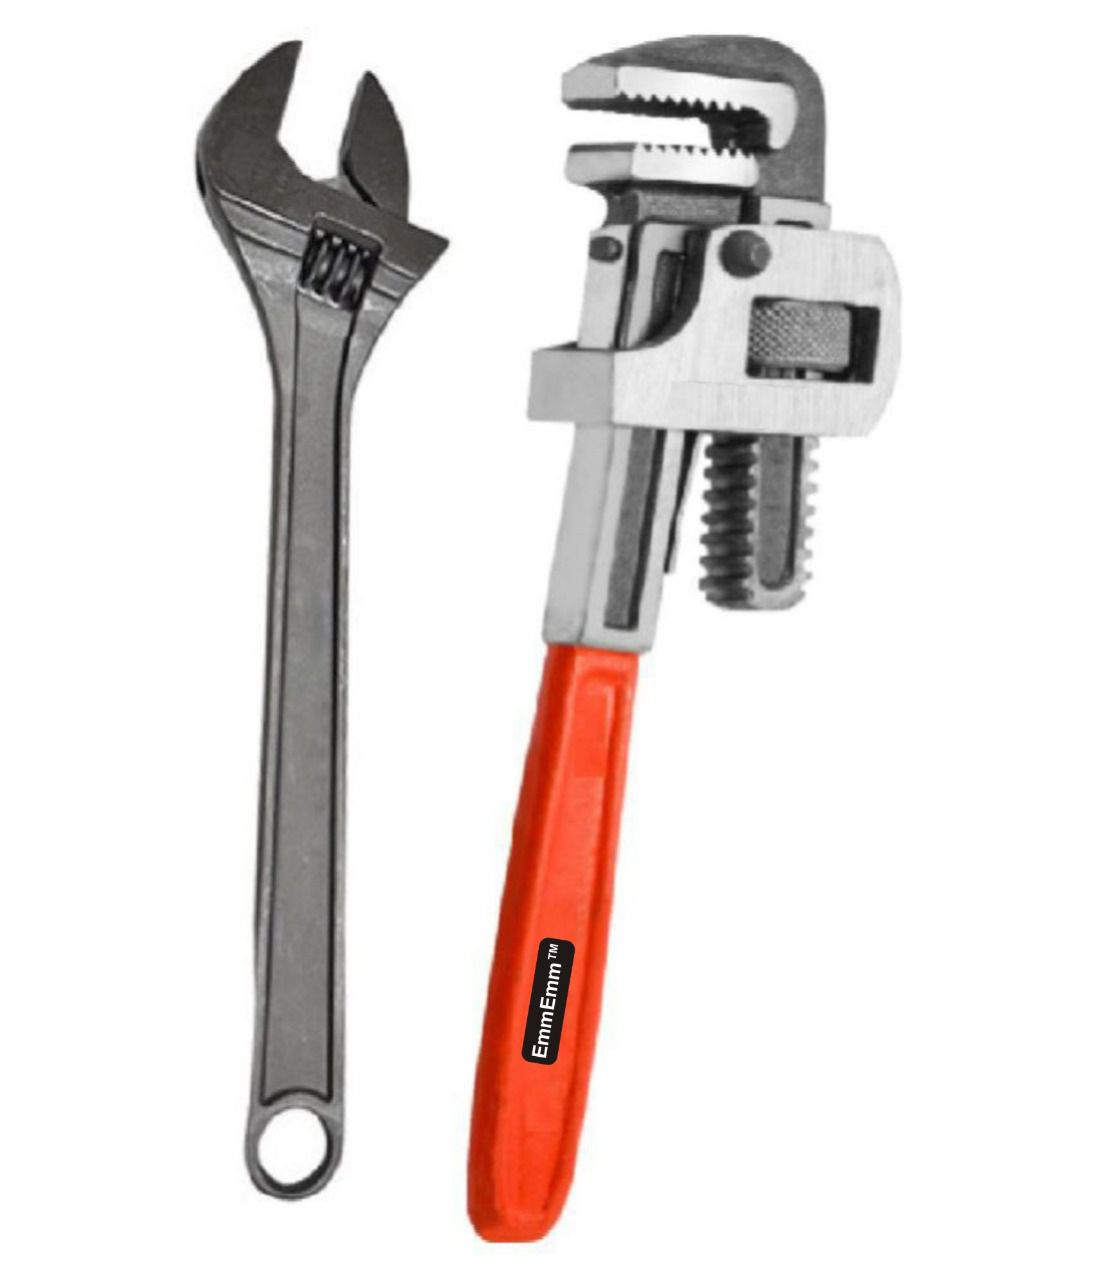     			EmmEmm Premium 10 Inch Pipe Wrench/Socket Wrench & 10 Inch Adjustable Wrench